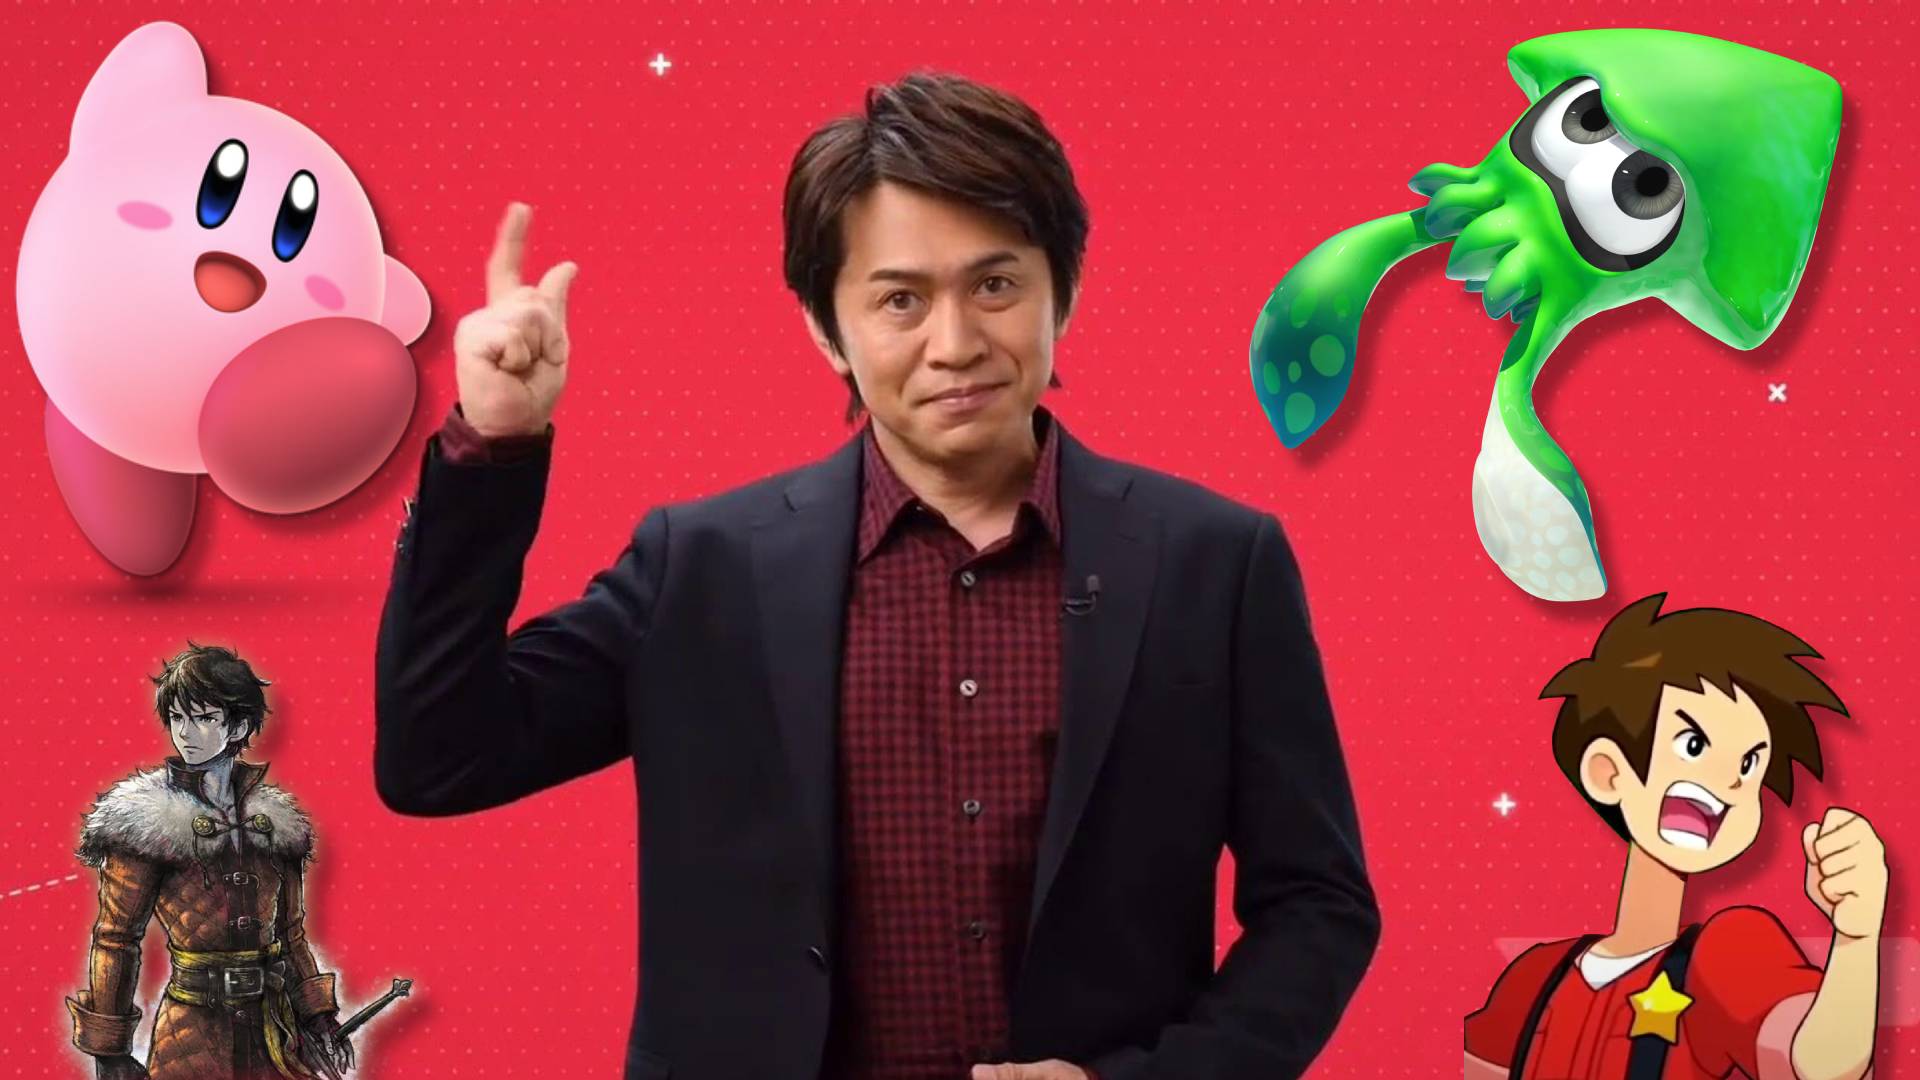 The February Nintendo Direct will focus mostly on titles for 2022